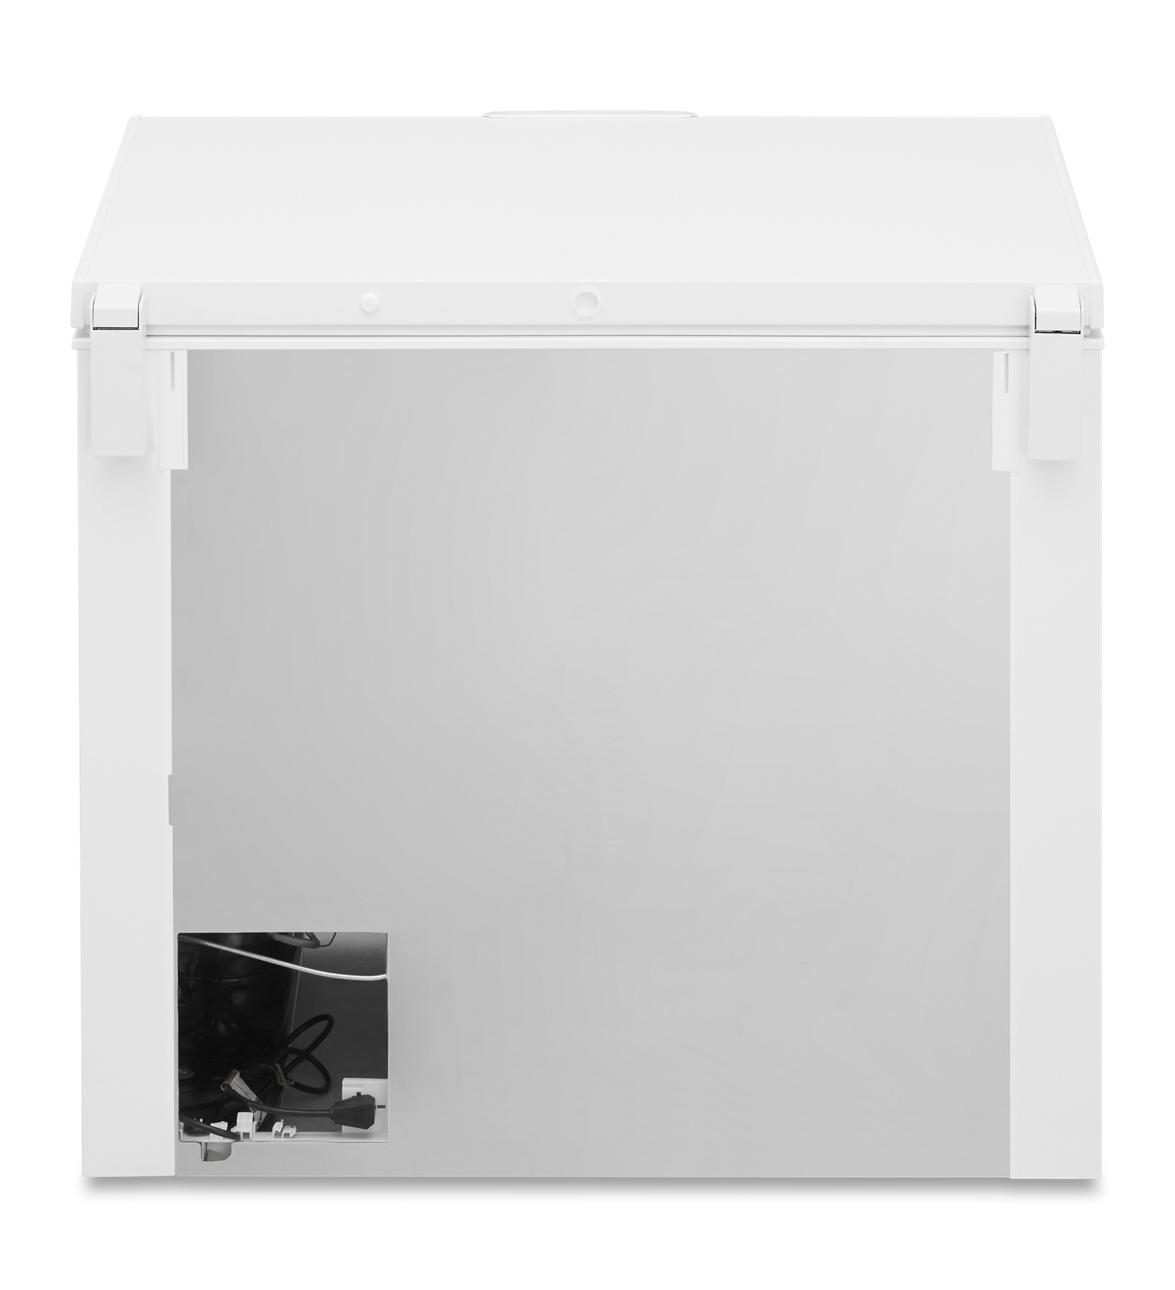 Kenmore Garage Ready 18.5-cu ft Manual Defrost Chest Freezer (White)